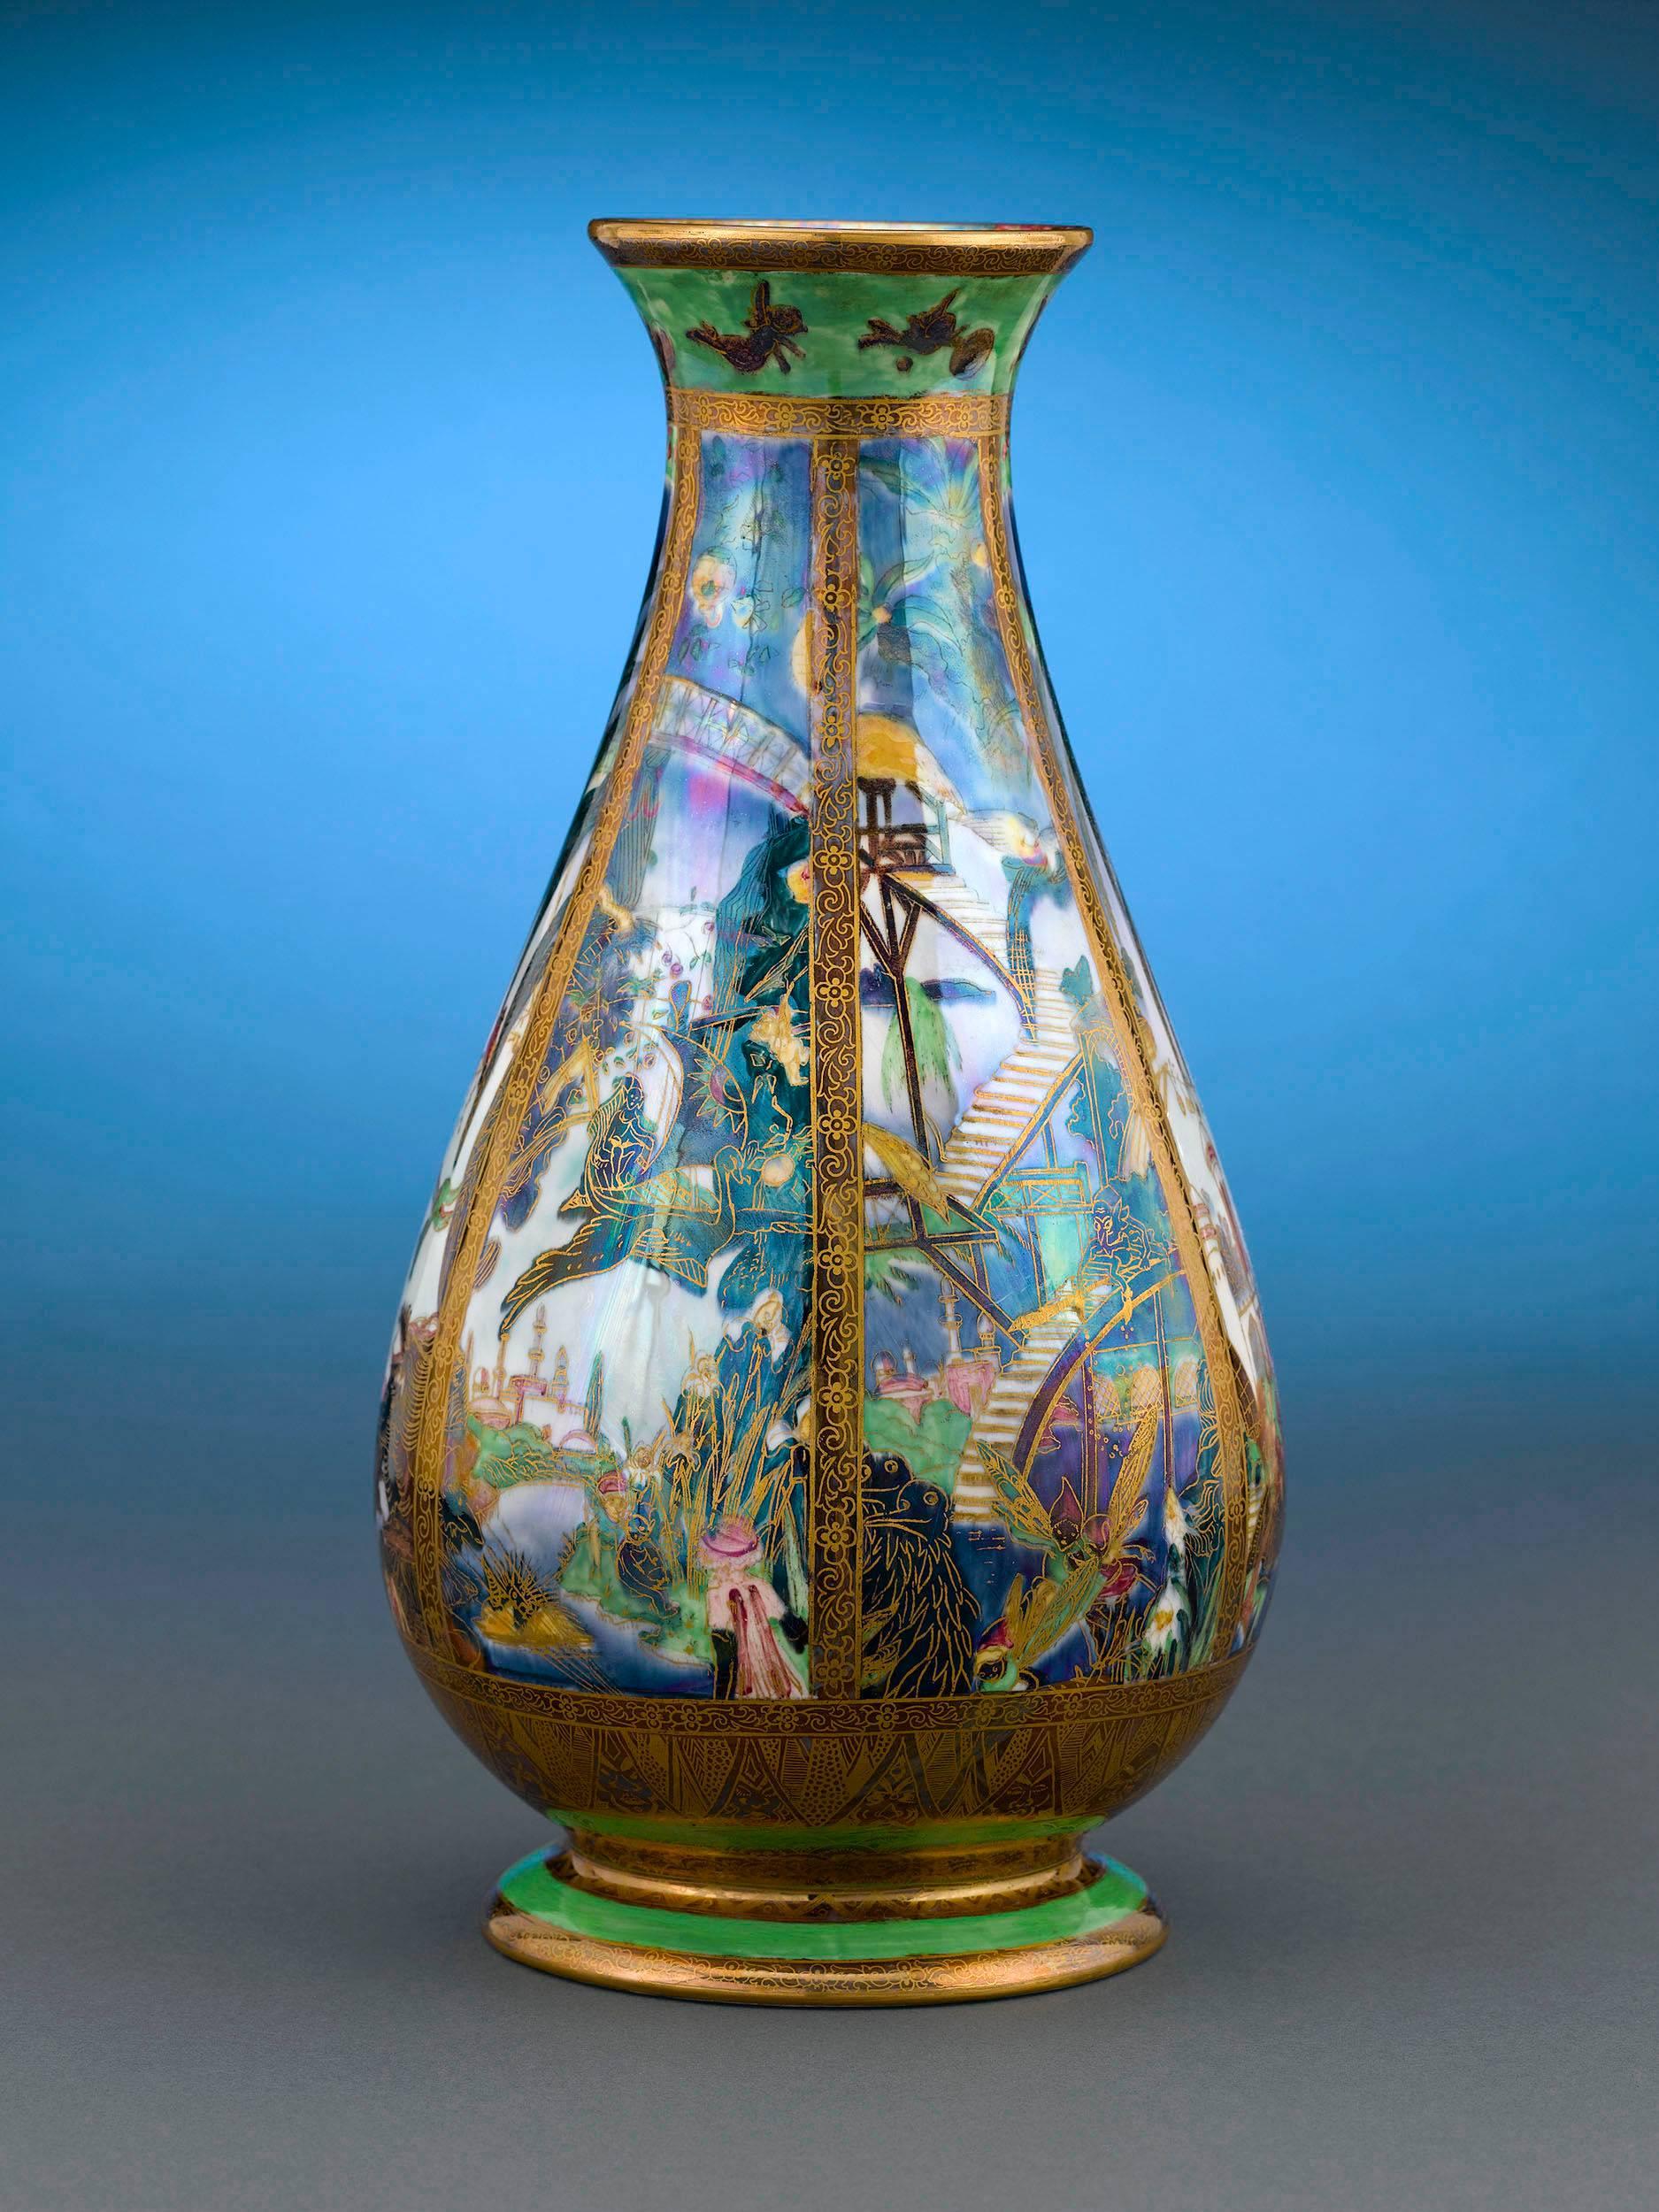 One of the earliest Fairyland Lustre motifs, this pillar pattern vase by Wedgwood features the fantastical Isle of the Genii, populated with nymphs and elves at every turn. Introduced by Wedgwood artist Daisy Makeig-Jones in 1915, Fairyland Lustre